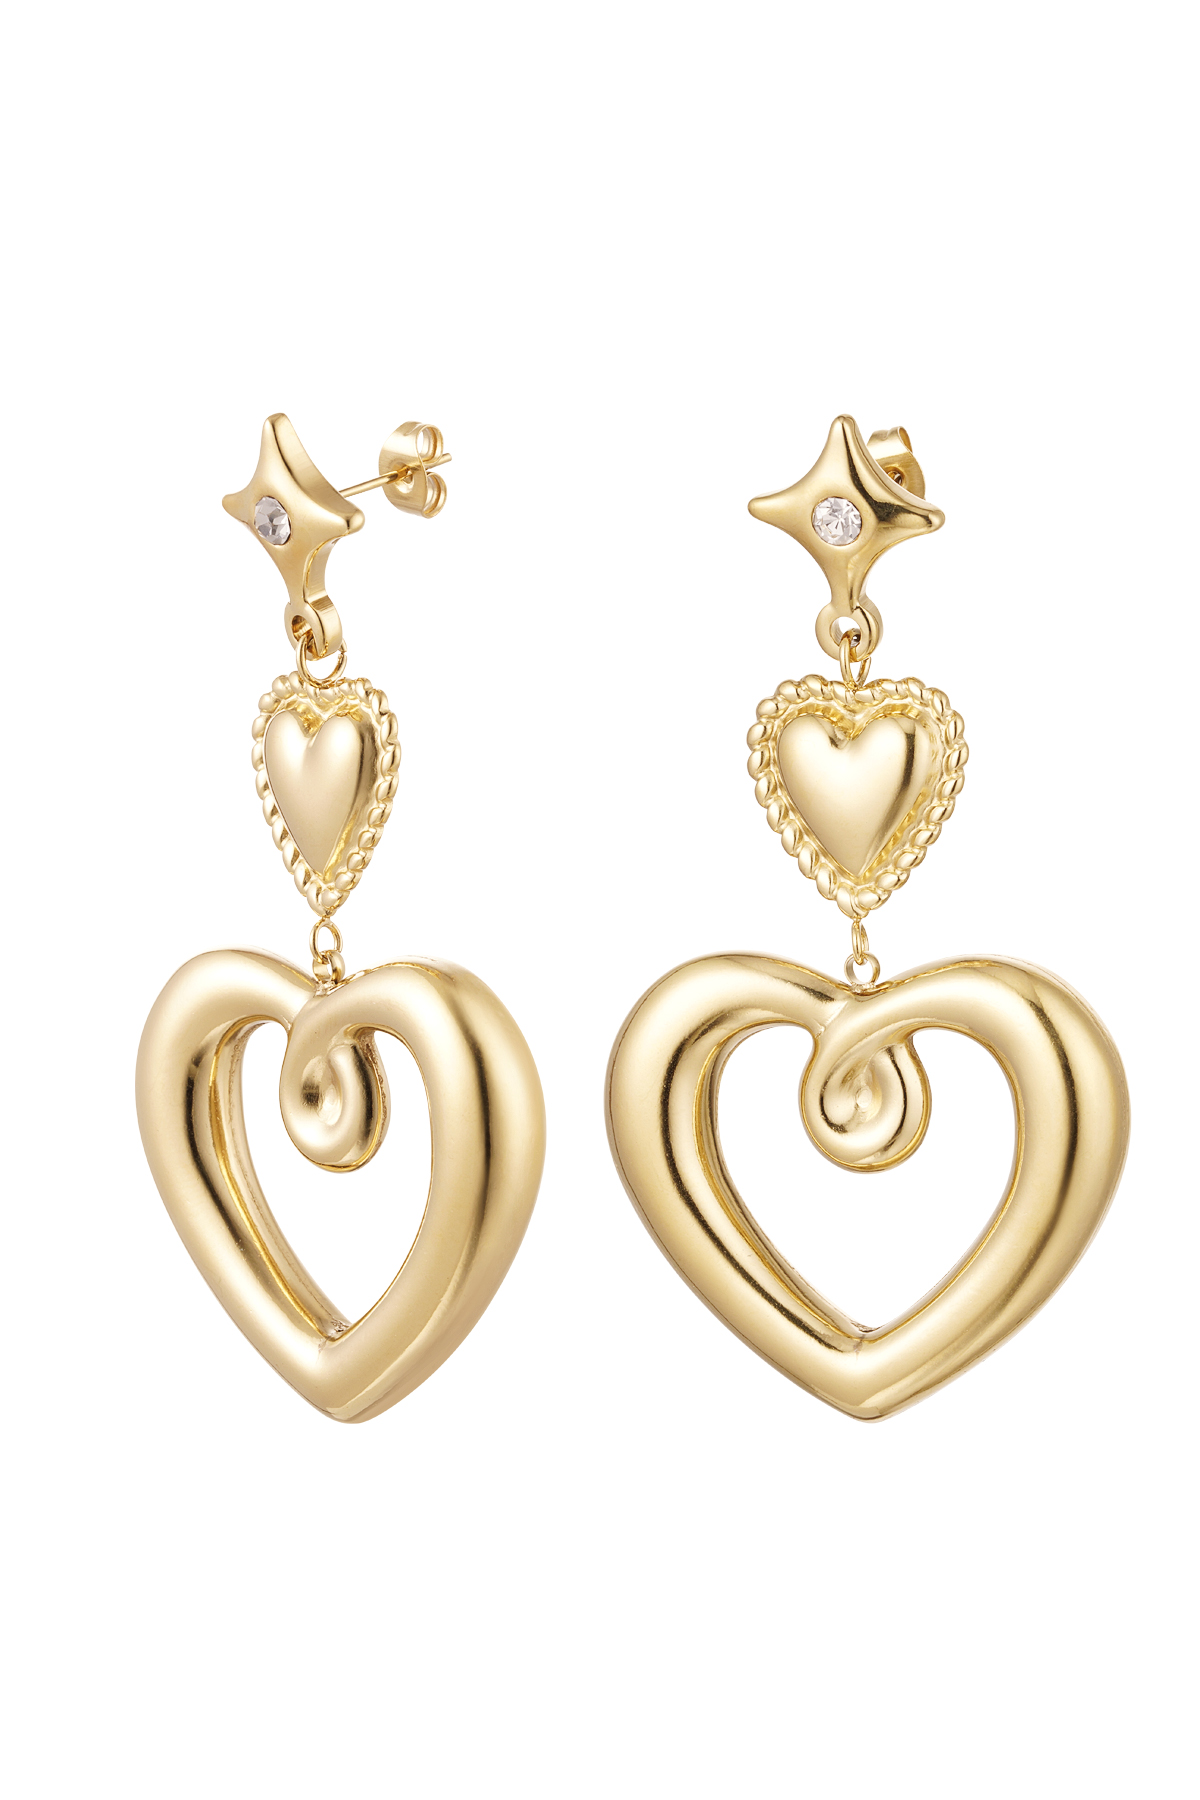 Statement earrings charms - gold Stainless Steel